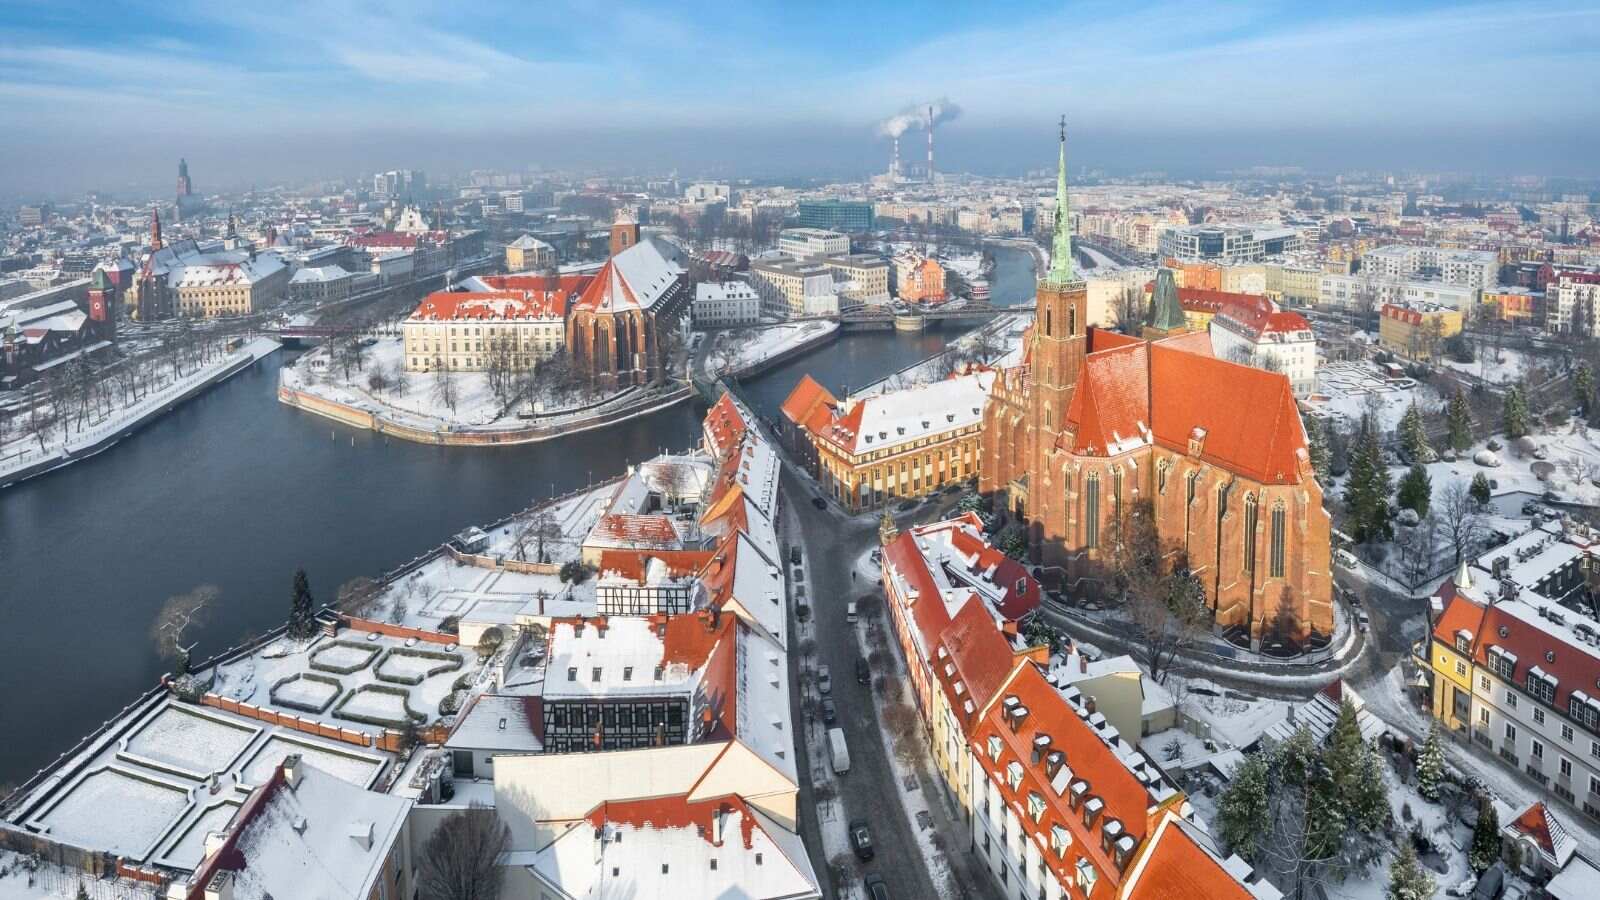 How Cold Is Poland Winter? A Quick Trip Guide 2022